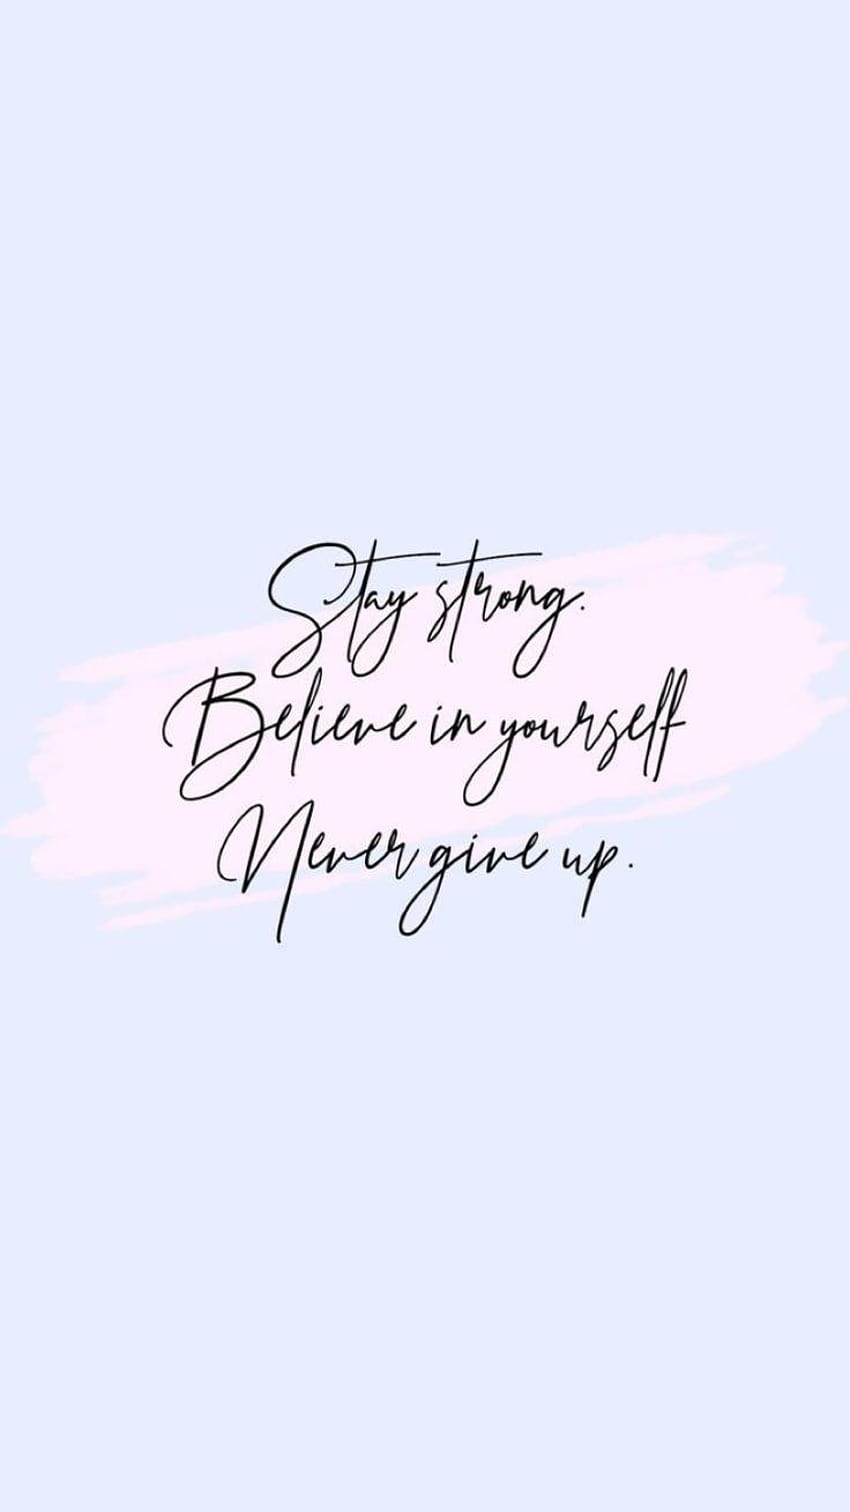 Stay strong, believe in yourself, never give up., aesthetic strong quotes HD phone wallpaper